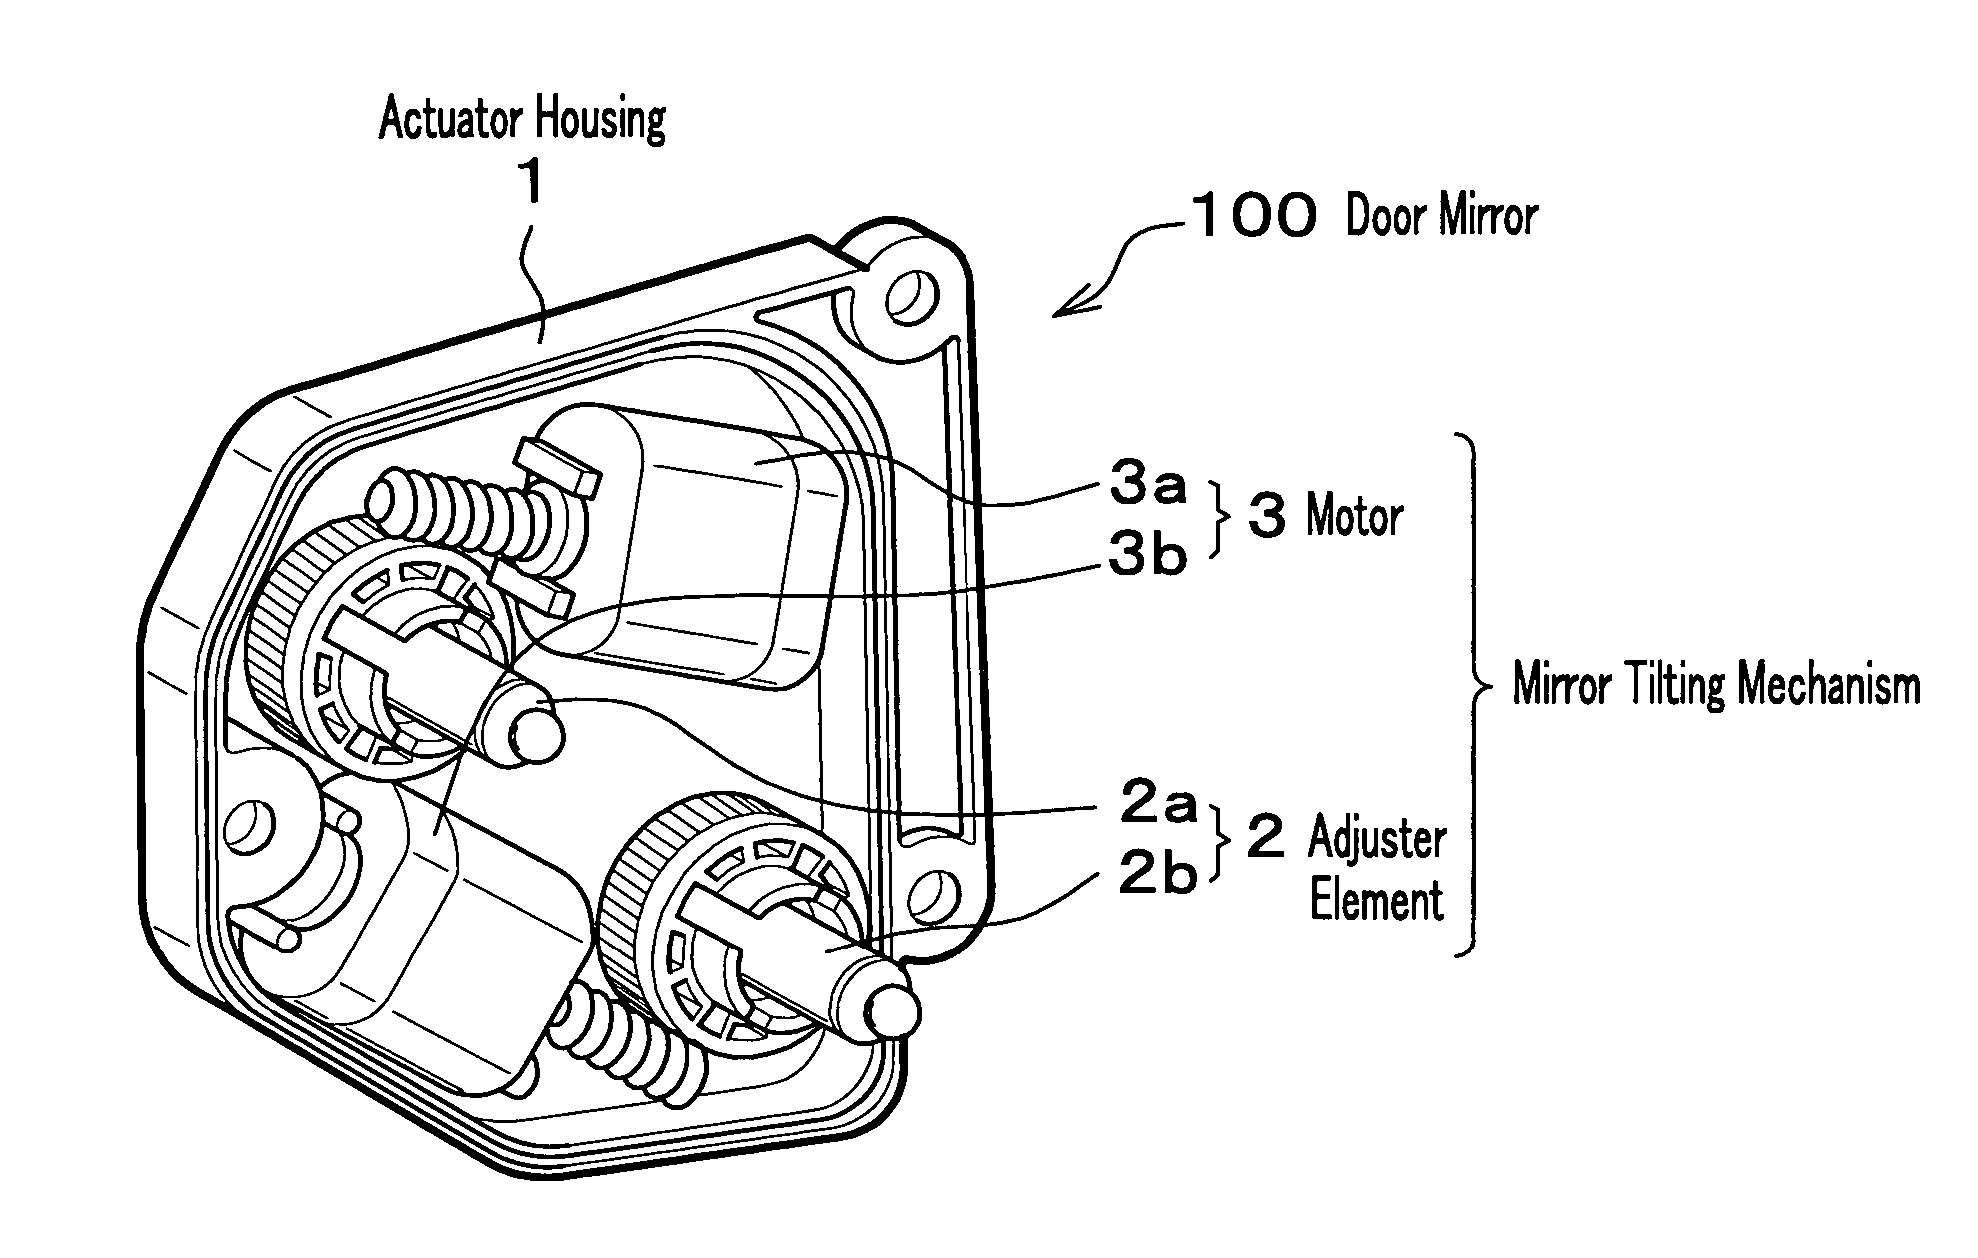 Mirror angle transducer and mirror tilting mechanism